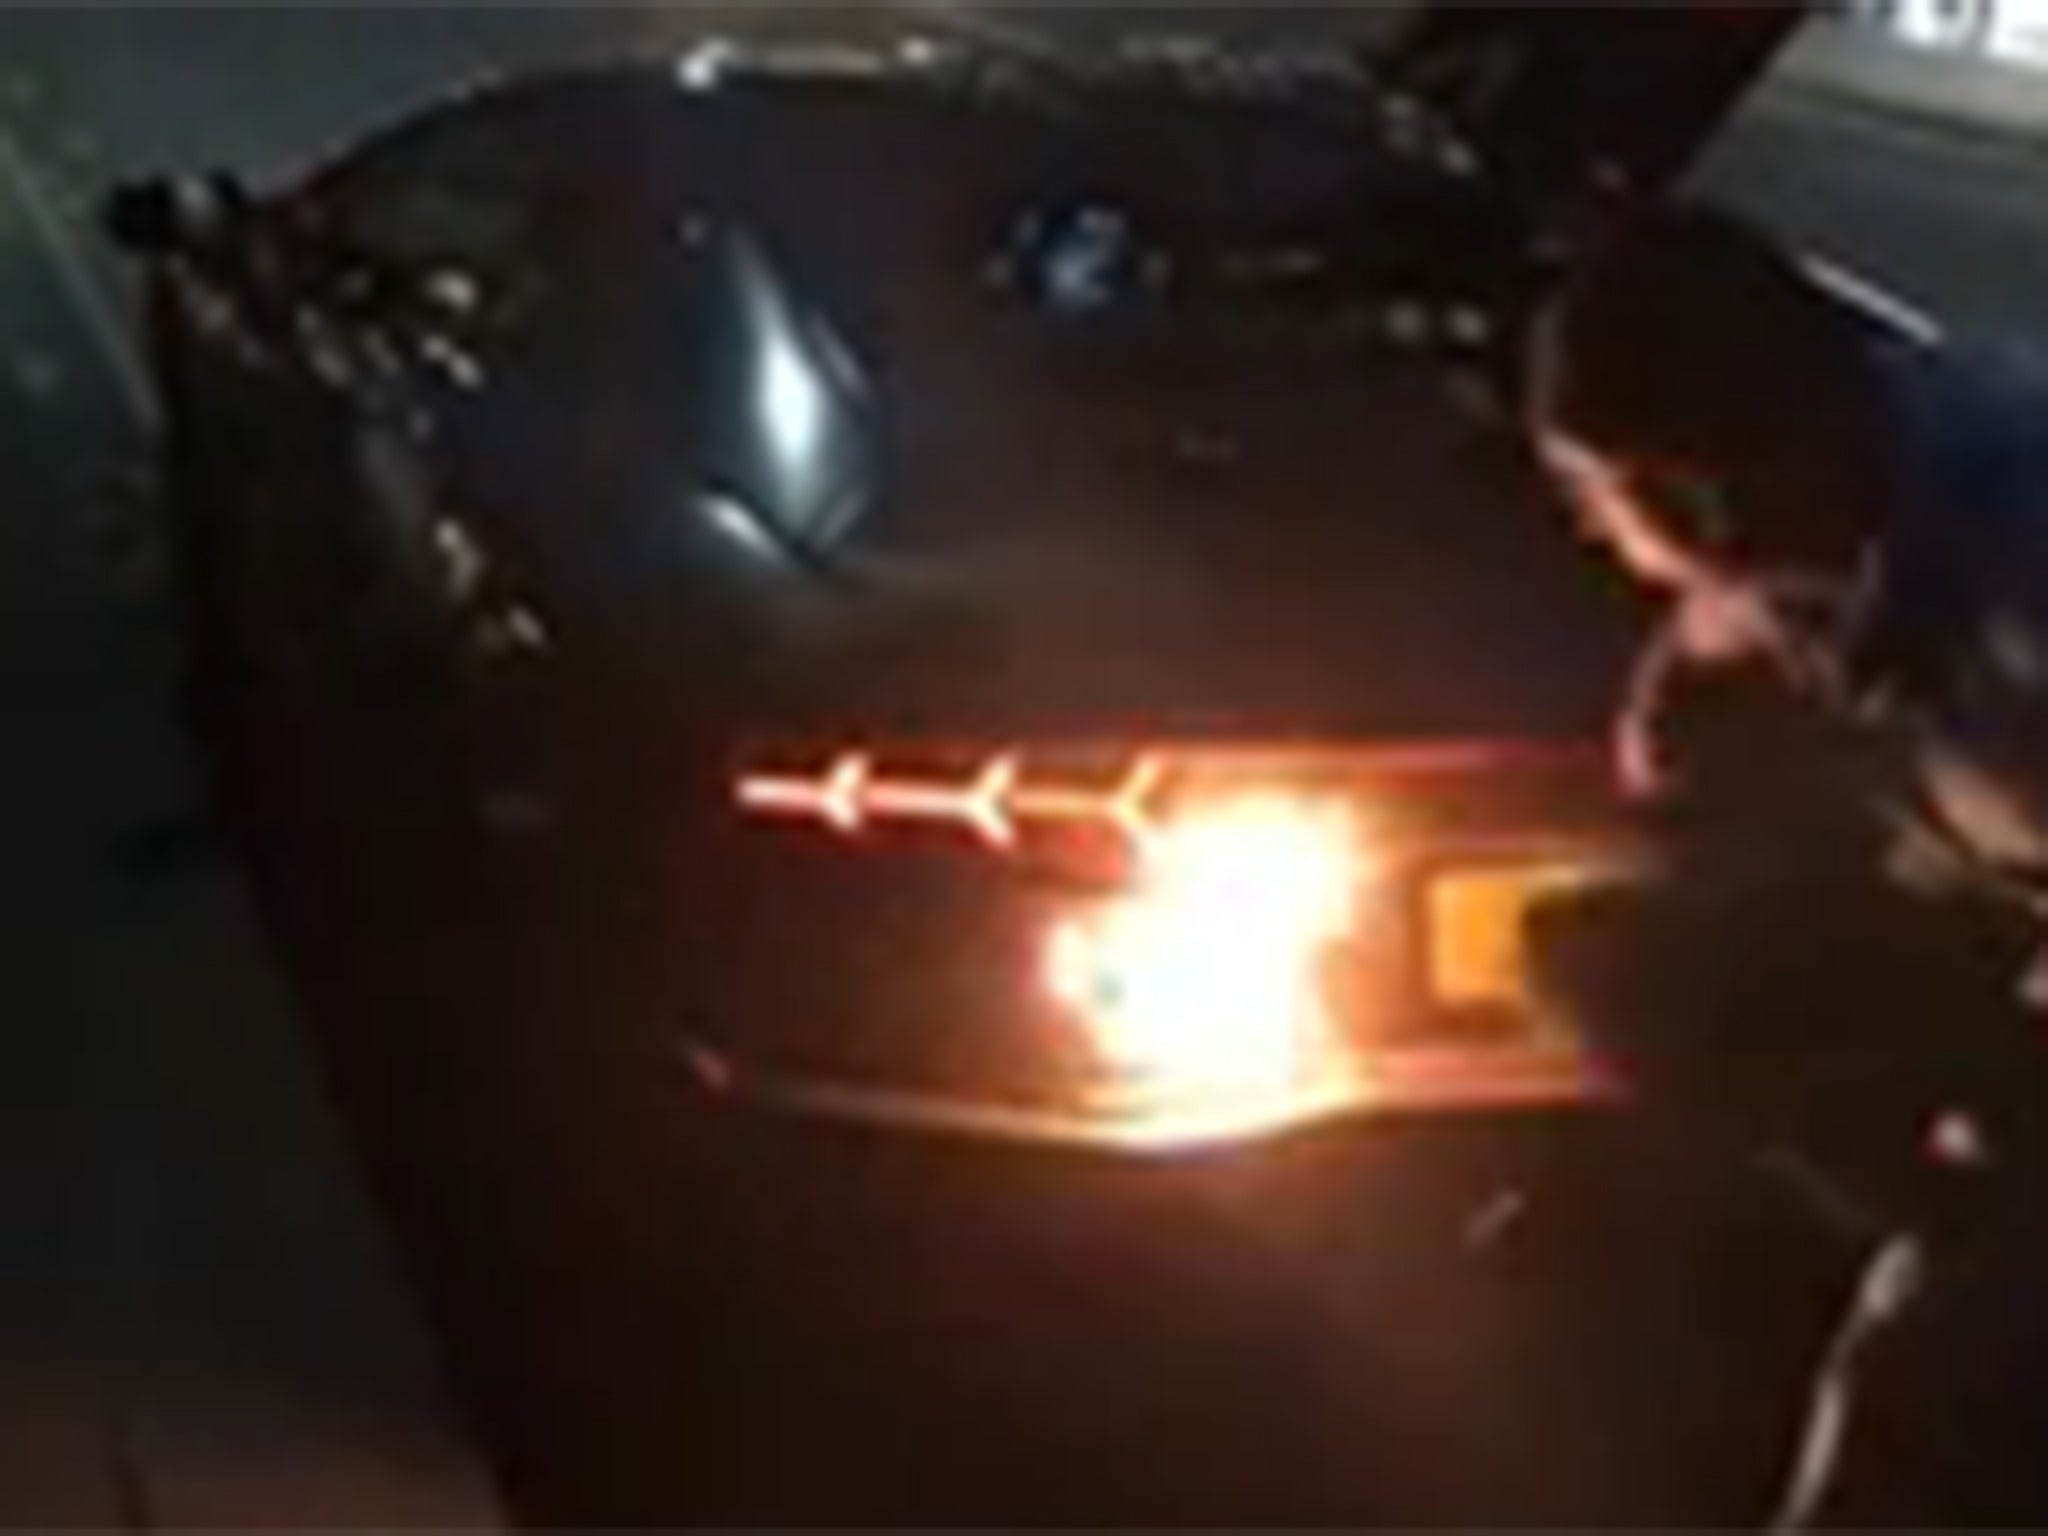 The owner of the Lamborghini tries to stop the fire by using a piece of clothing to swat at it